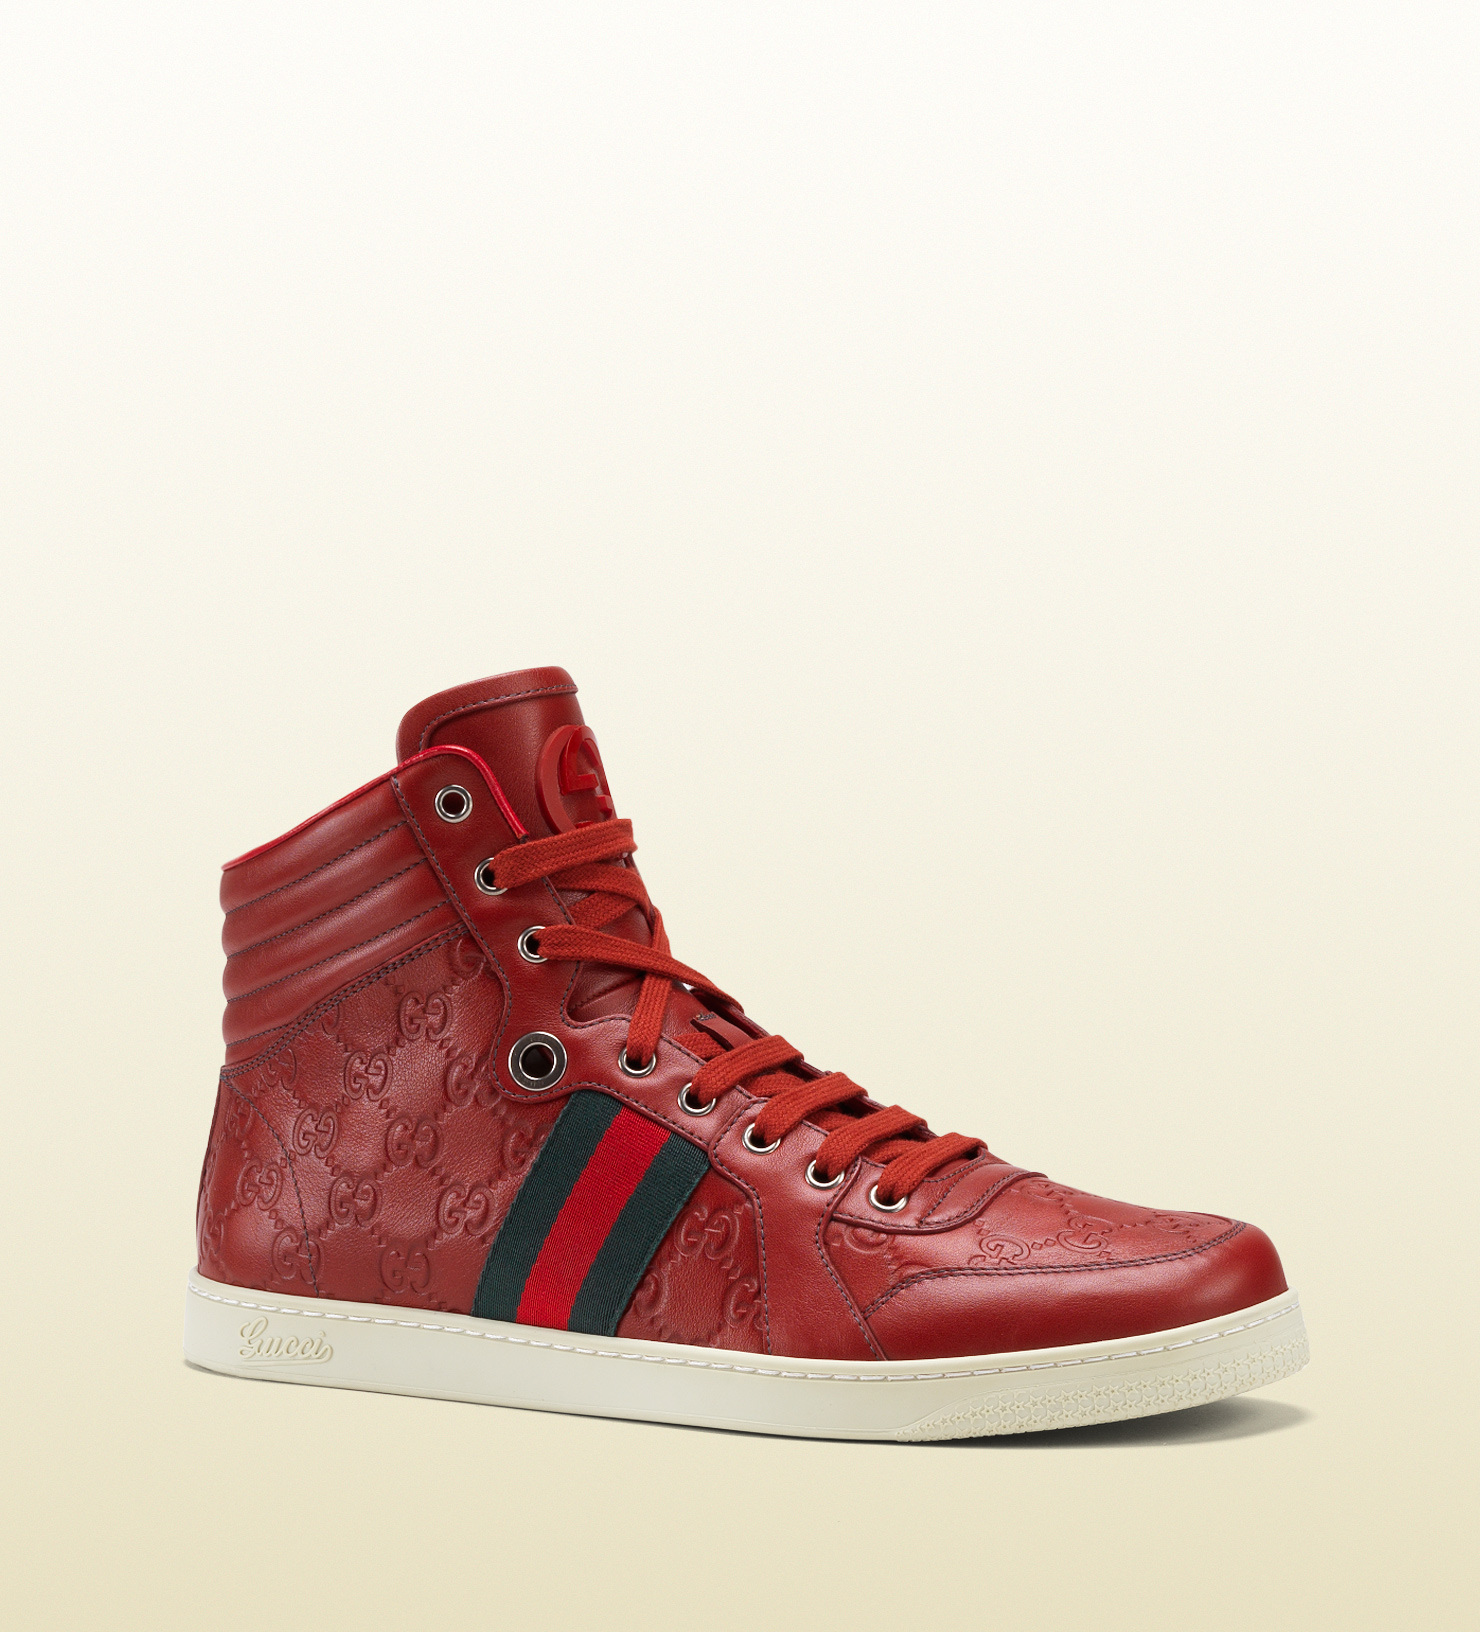 Gucci Ssima Leather High-top Sneaker in Red for Men - Lyst